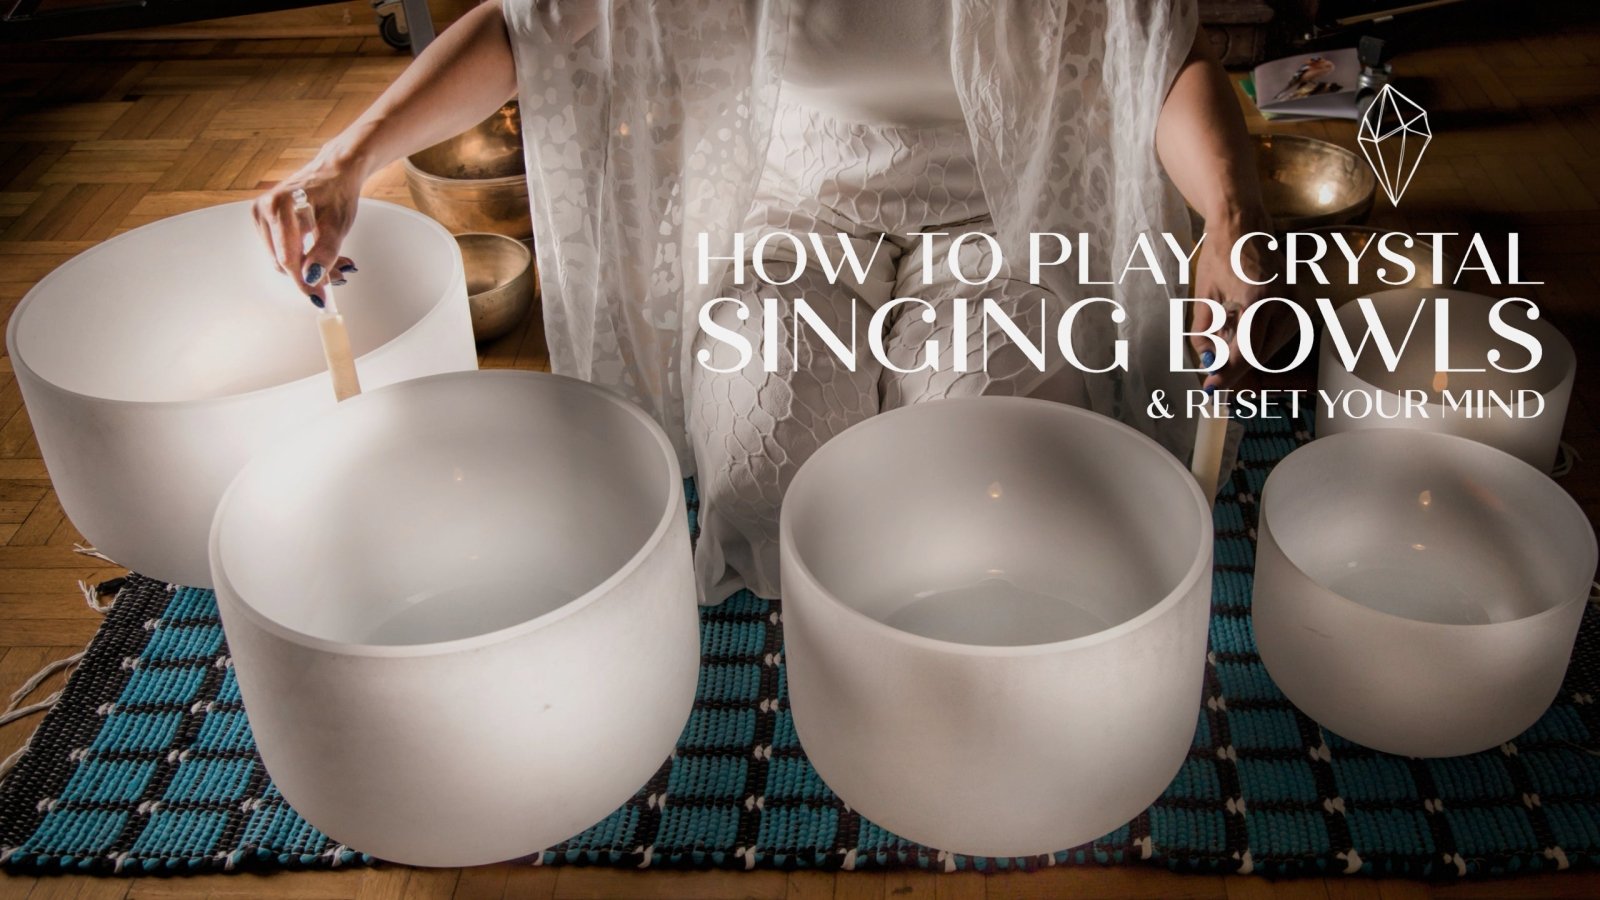 How to Play Crystal Singing Bowls - Sound Healing LAB